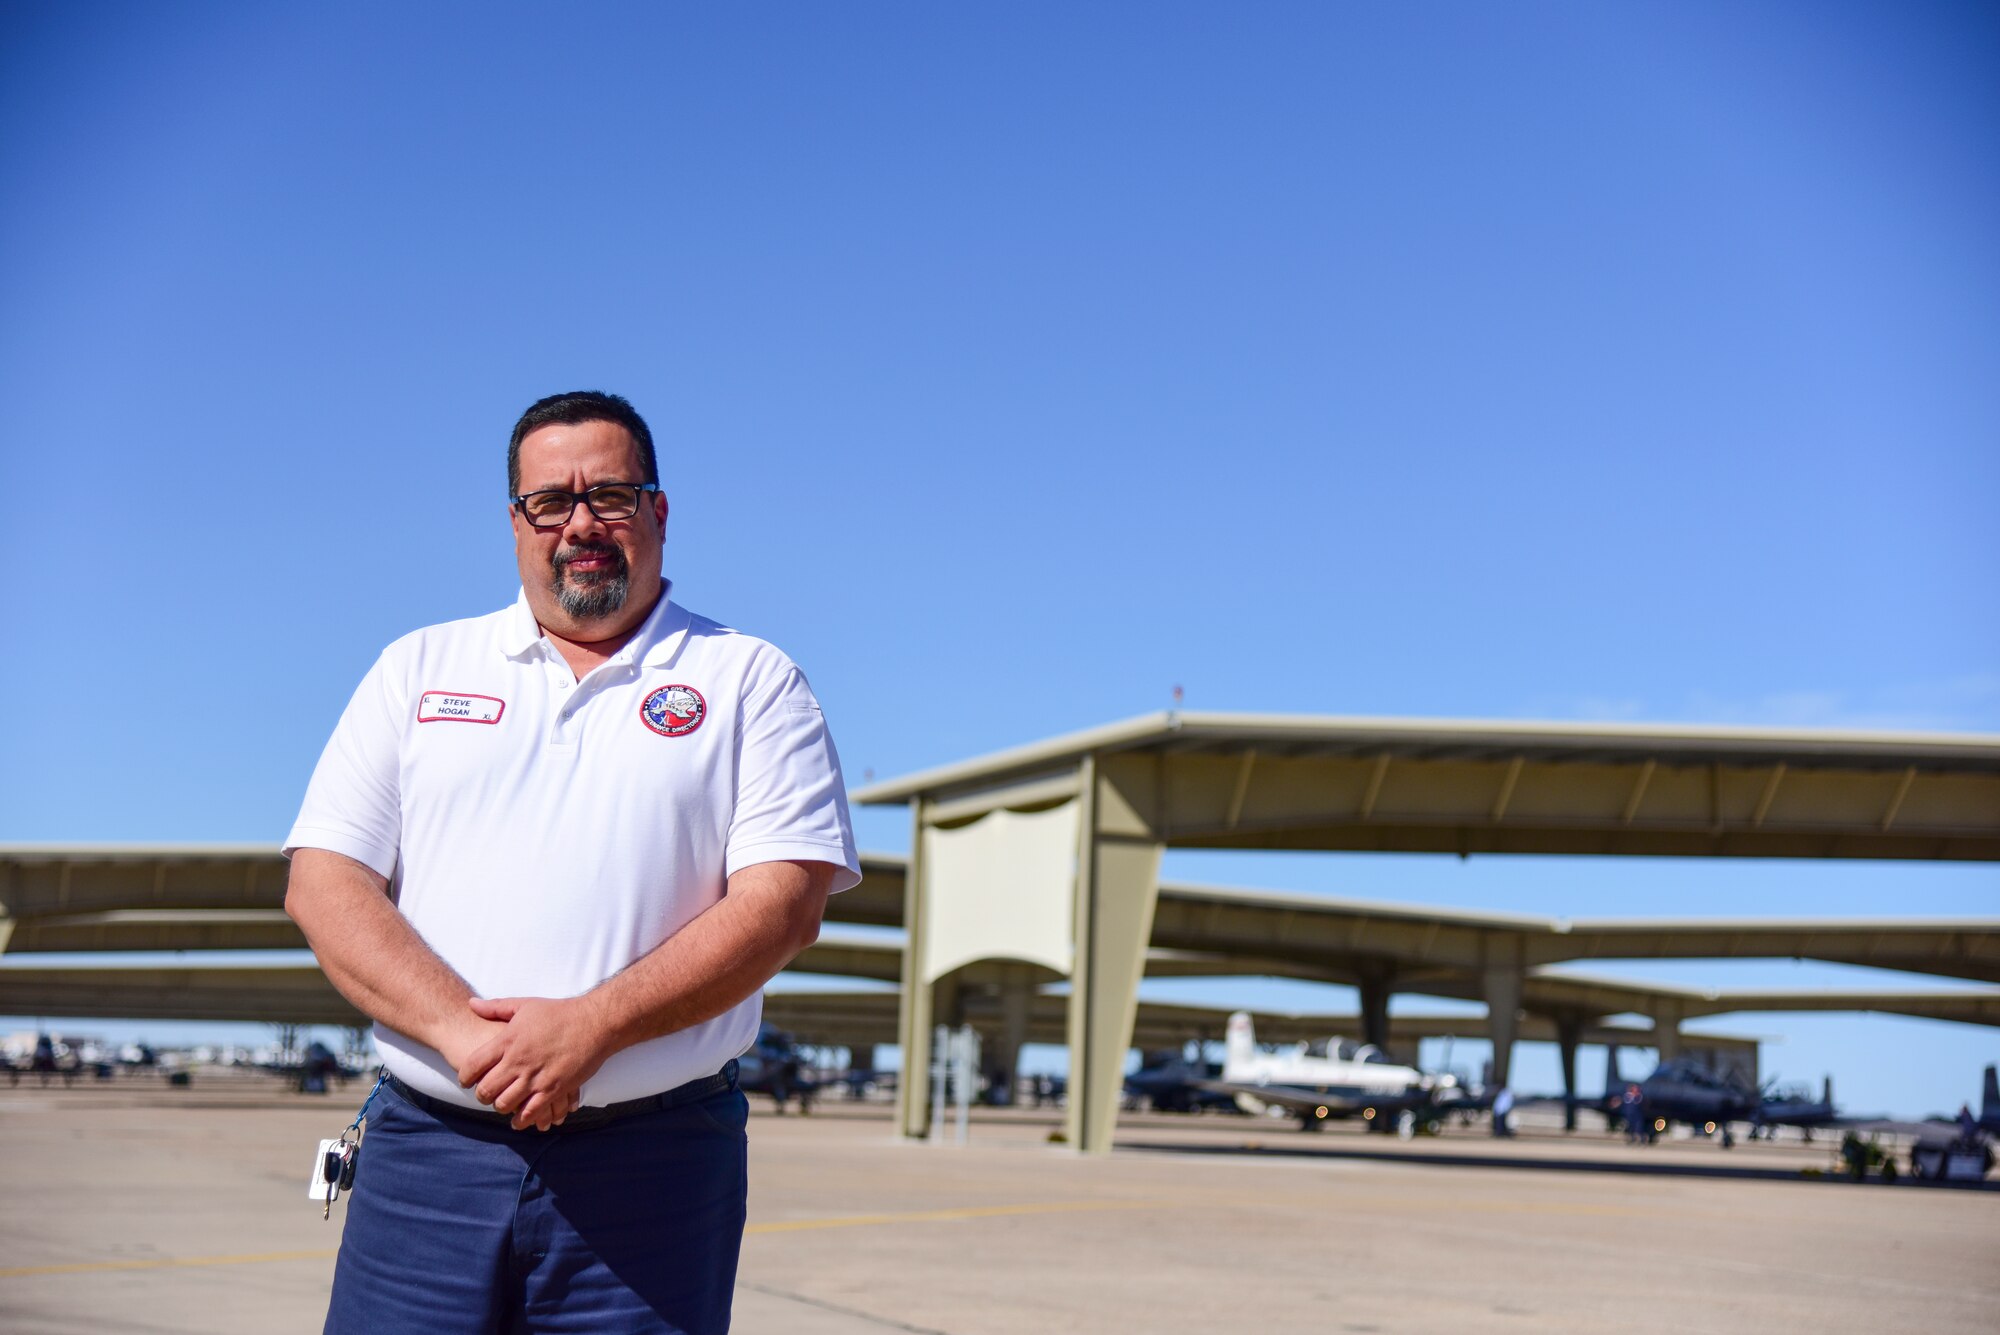 Steve Hogan, 47th Maintenance T-1A Jayhawk phase supervisor, looks forward to March 14, 2020, a special Saturday here at Laughlin Air Force Base, Texas, the day of the bases’ first airshow of the decade. Hogan, a military brat, shares there’s something about planes he’s always loved. “My father was an aircraft mechanic for the U.S. Air Force, and I followed his footsteps,” Hogan said. (U.S. Air Force photo by Senior Airman Anne McCready)